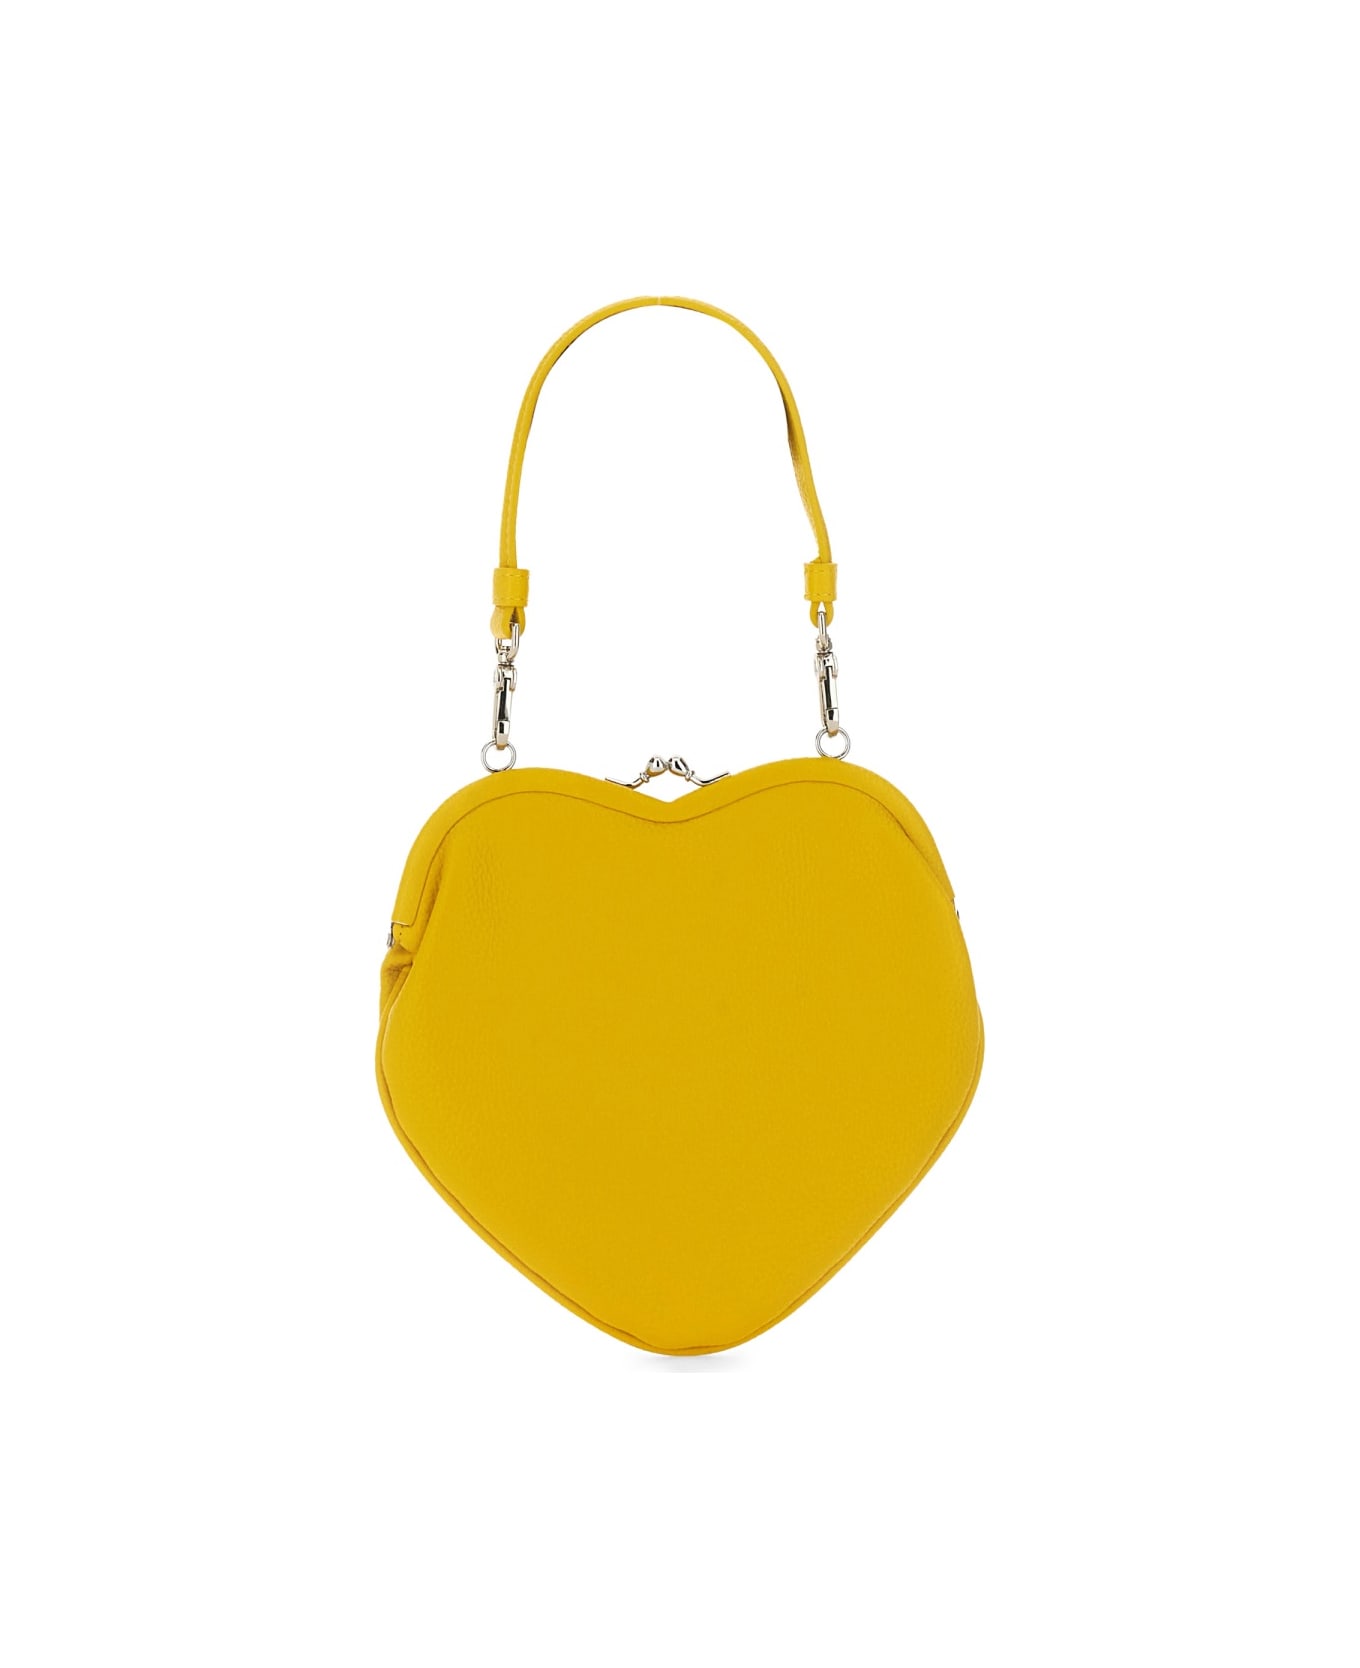 Vivienne Westwood "belle" Heart Frame Bag - YELLOW クラッチバッグ